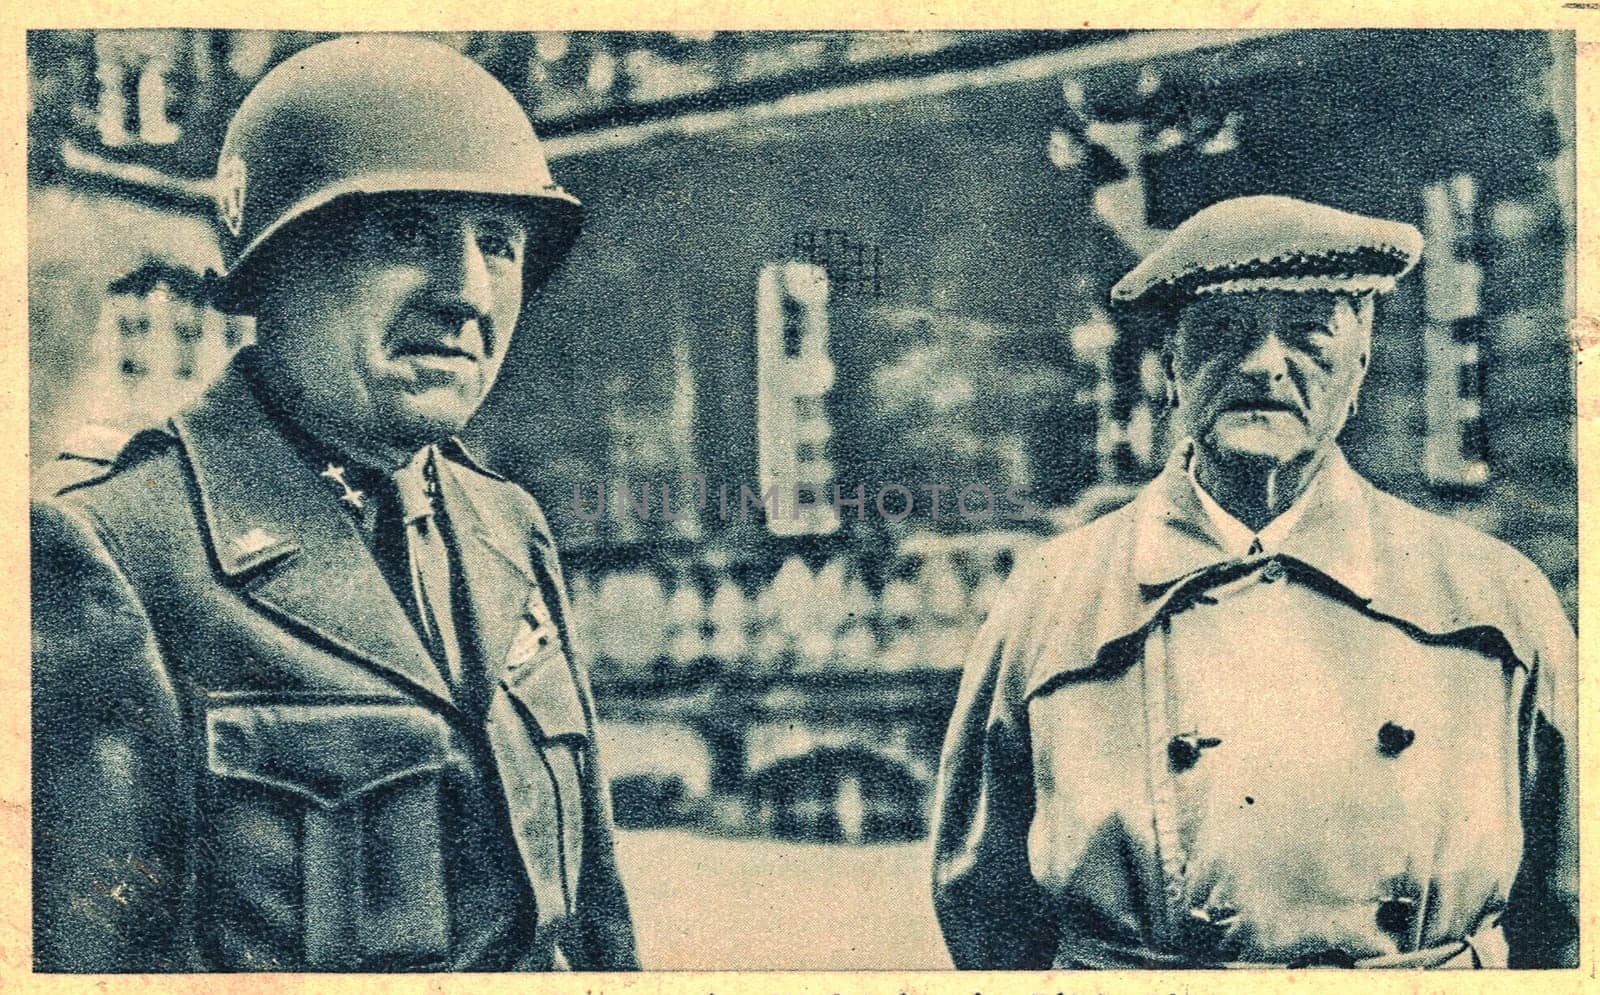 Miklos Horthy de Nagybanya - Nicholas Horthy. In October 1944, Horthy announced that Hungary had declared an armistice with the Allies and withdrawn from the Axis. He was forced to resign, placed under arrest by the Germans and taken to Bavaria. At the end of the war, he came under the custody of American troops. In the photo are Horthy and American soldier. by roman_nerud